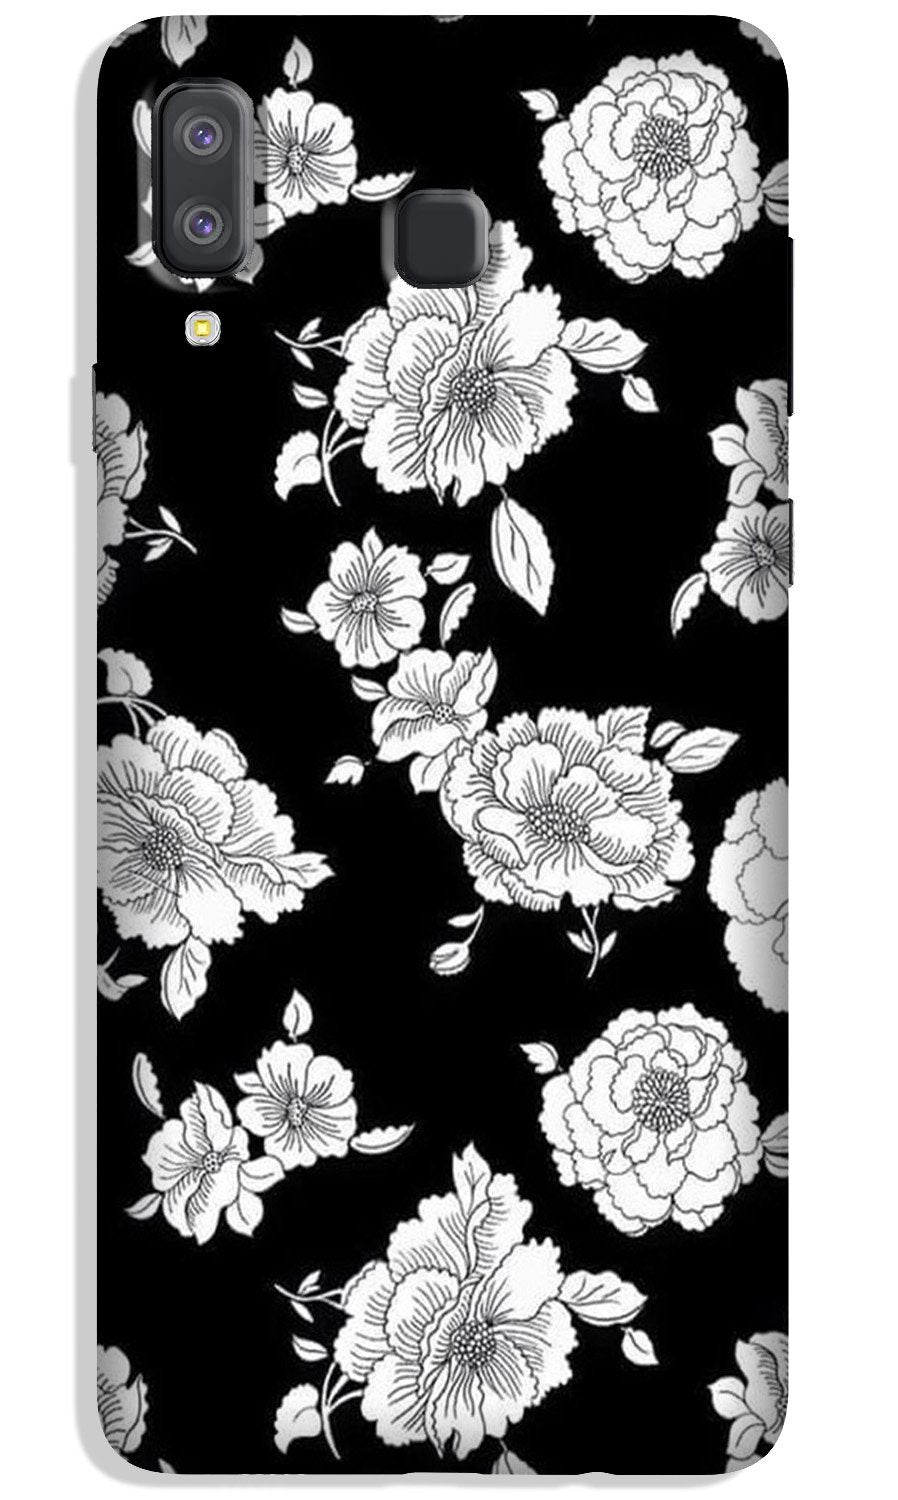 White flowers Black Background Case for Galaxy A8 Star